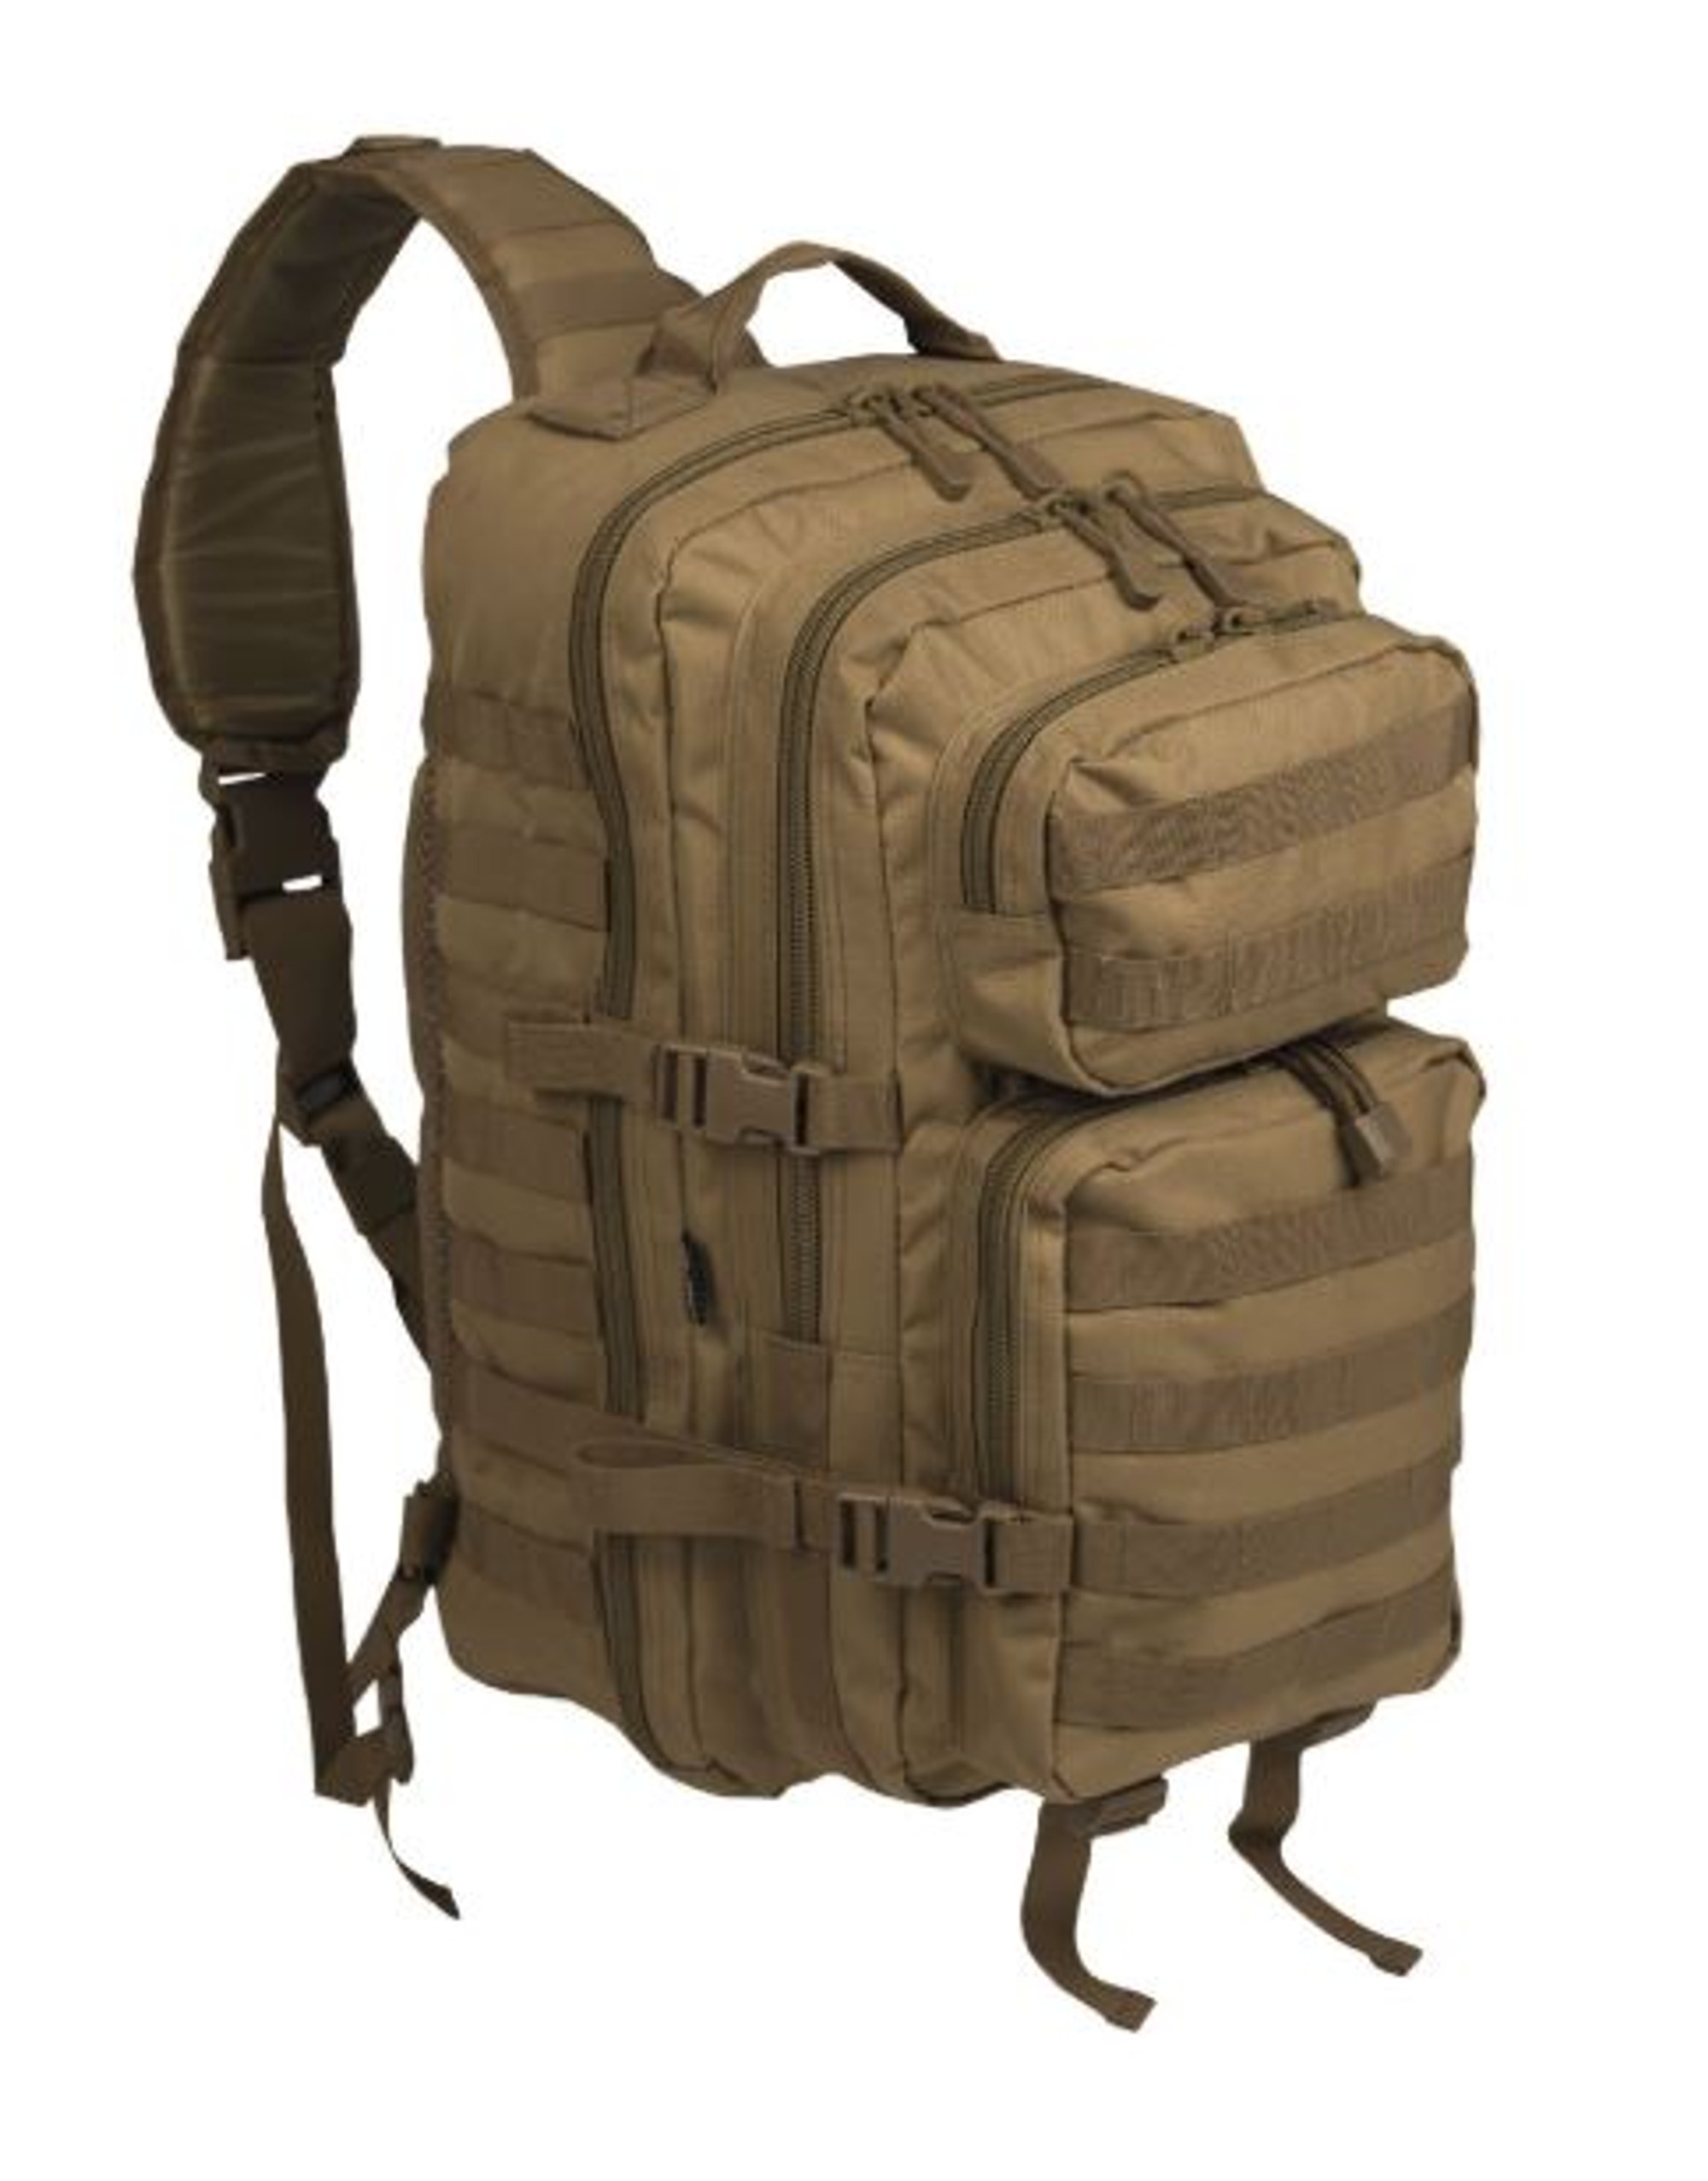 Mil-Tec Coyote Single-Strap Large Assault Pack